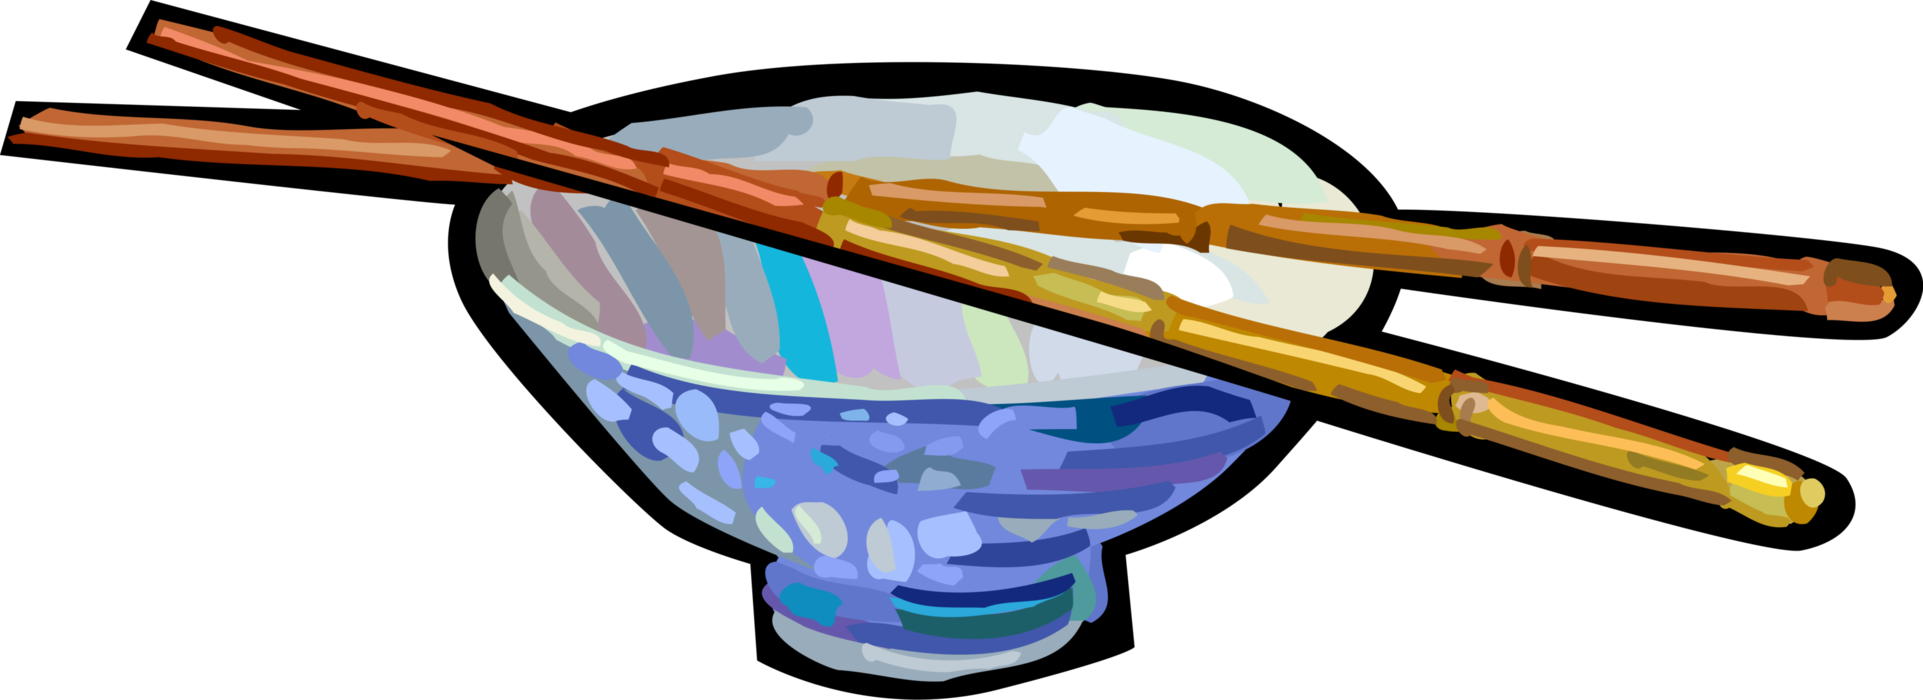 Vector Illustration of Chinese Cuisine Rice Bowl with Chopsticks